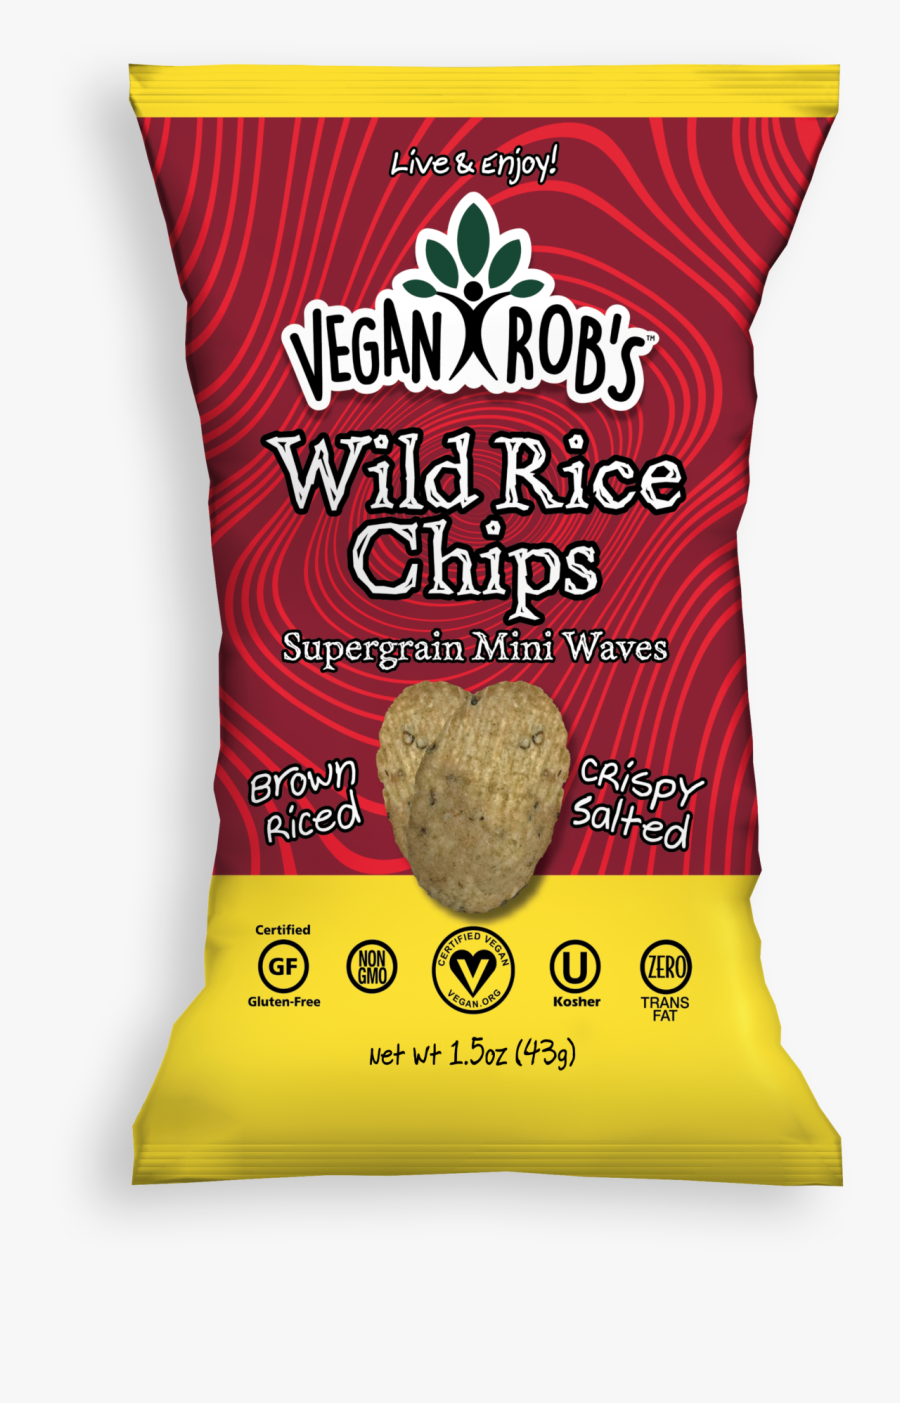 Chips Transparent Unhealthy Food - Vegan Rob's Rice Chips, Transparent Clipart